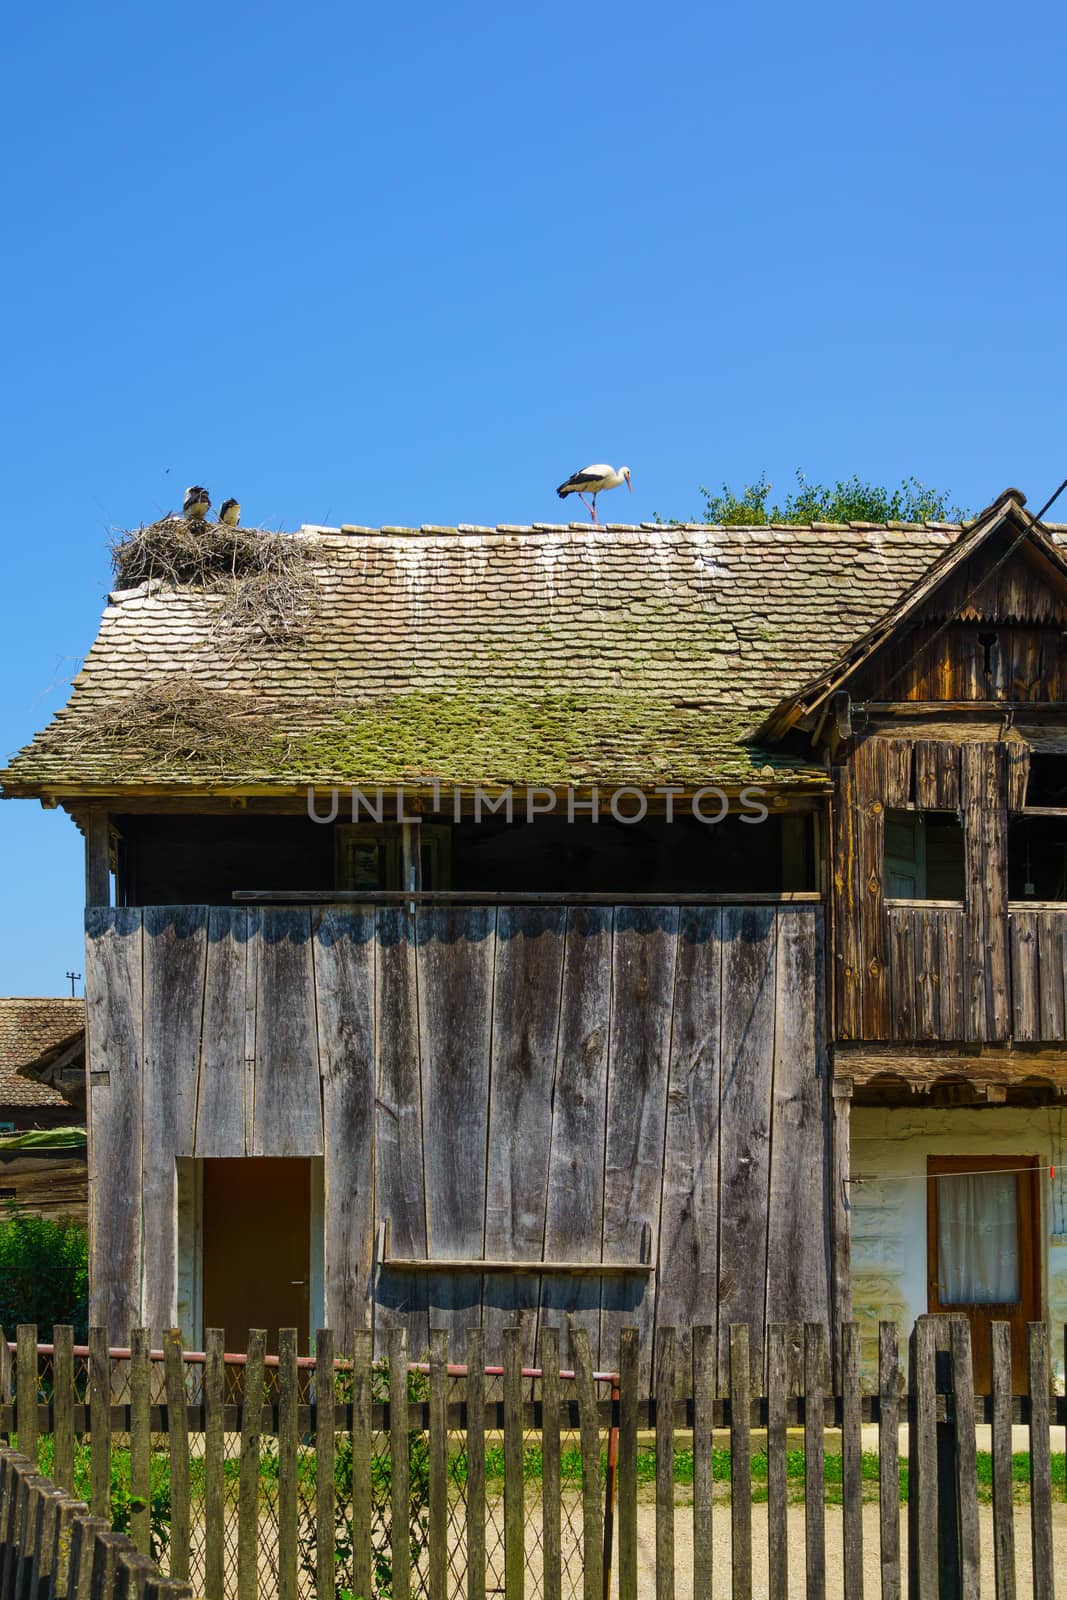 Typical wooden house, with Storks nesting on the roof, in the village Cigoc, Lonjsko Polje area, Croatia